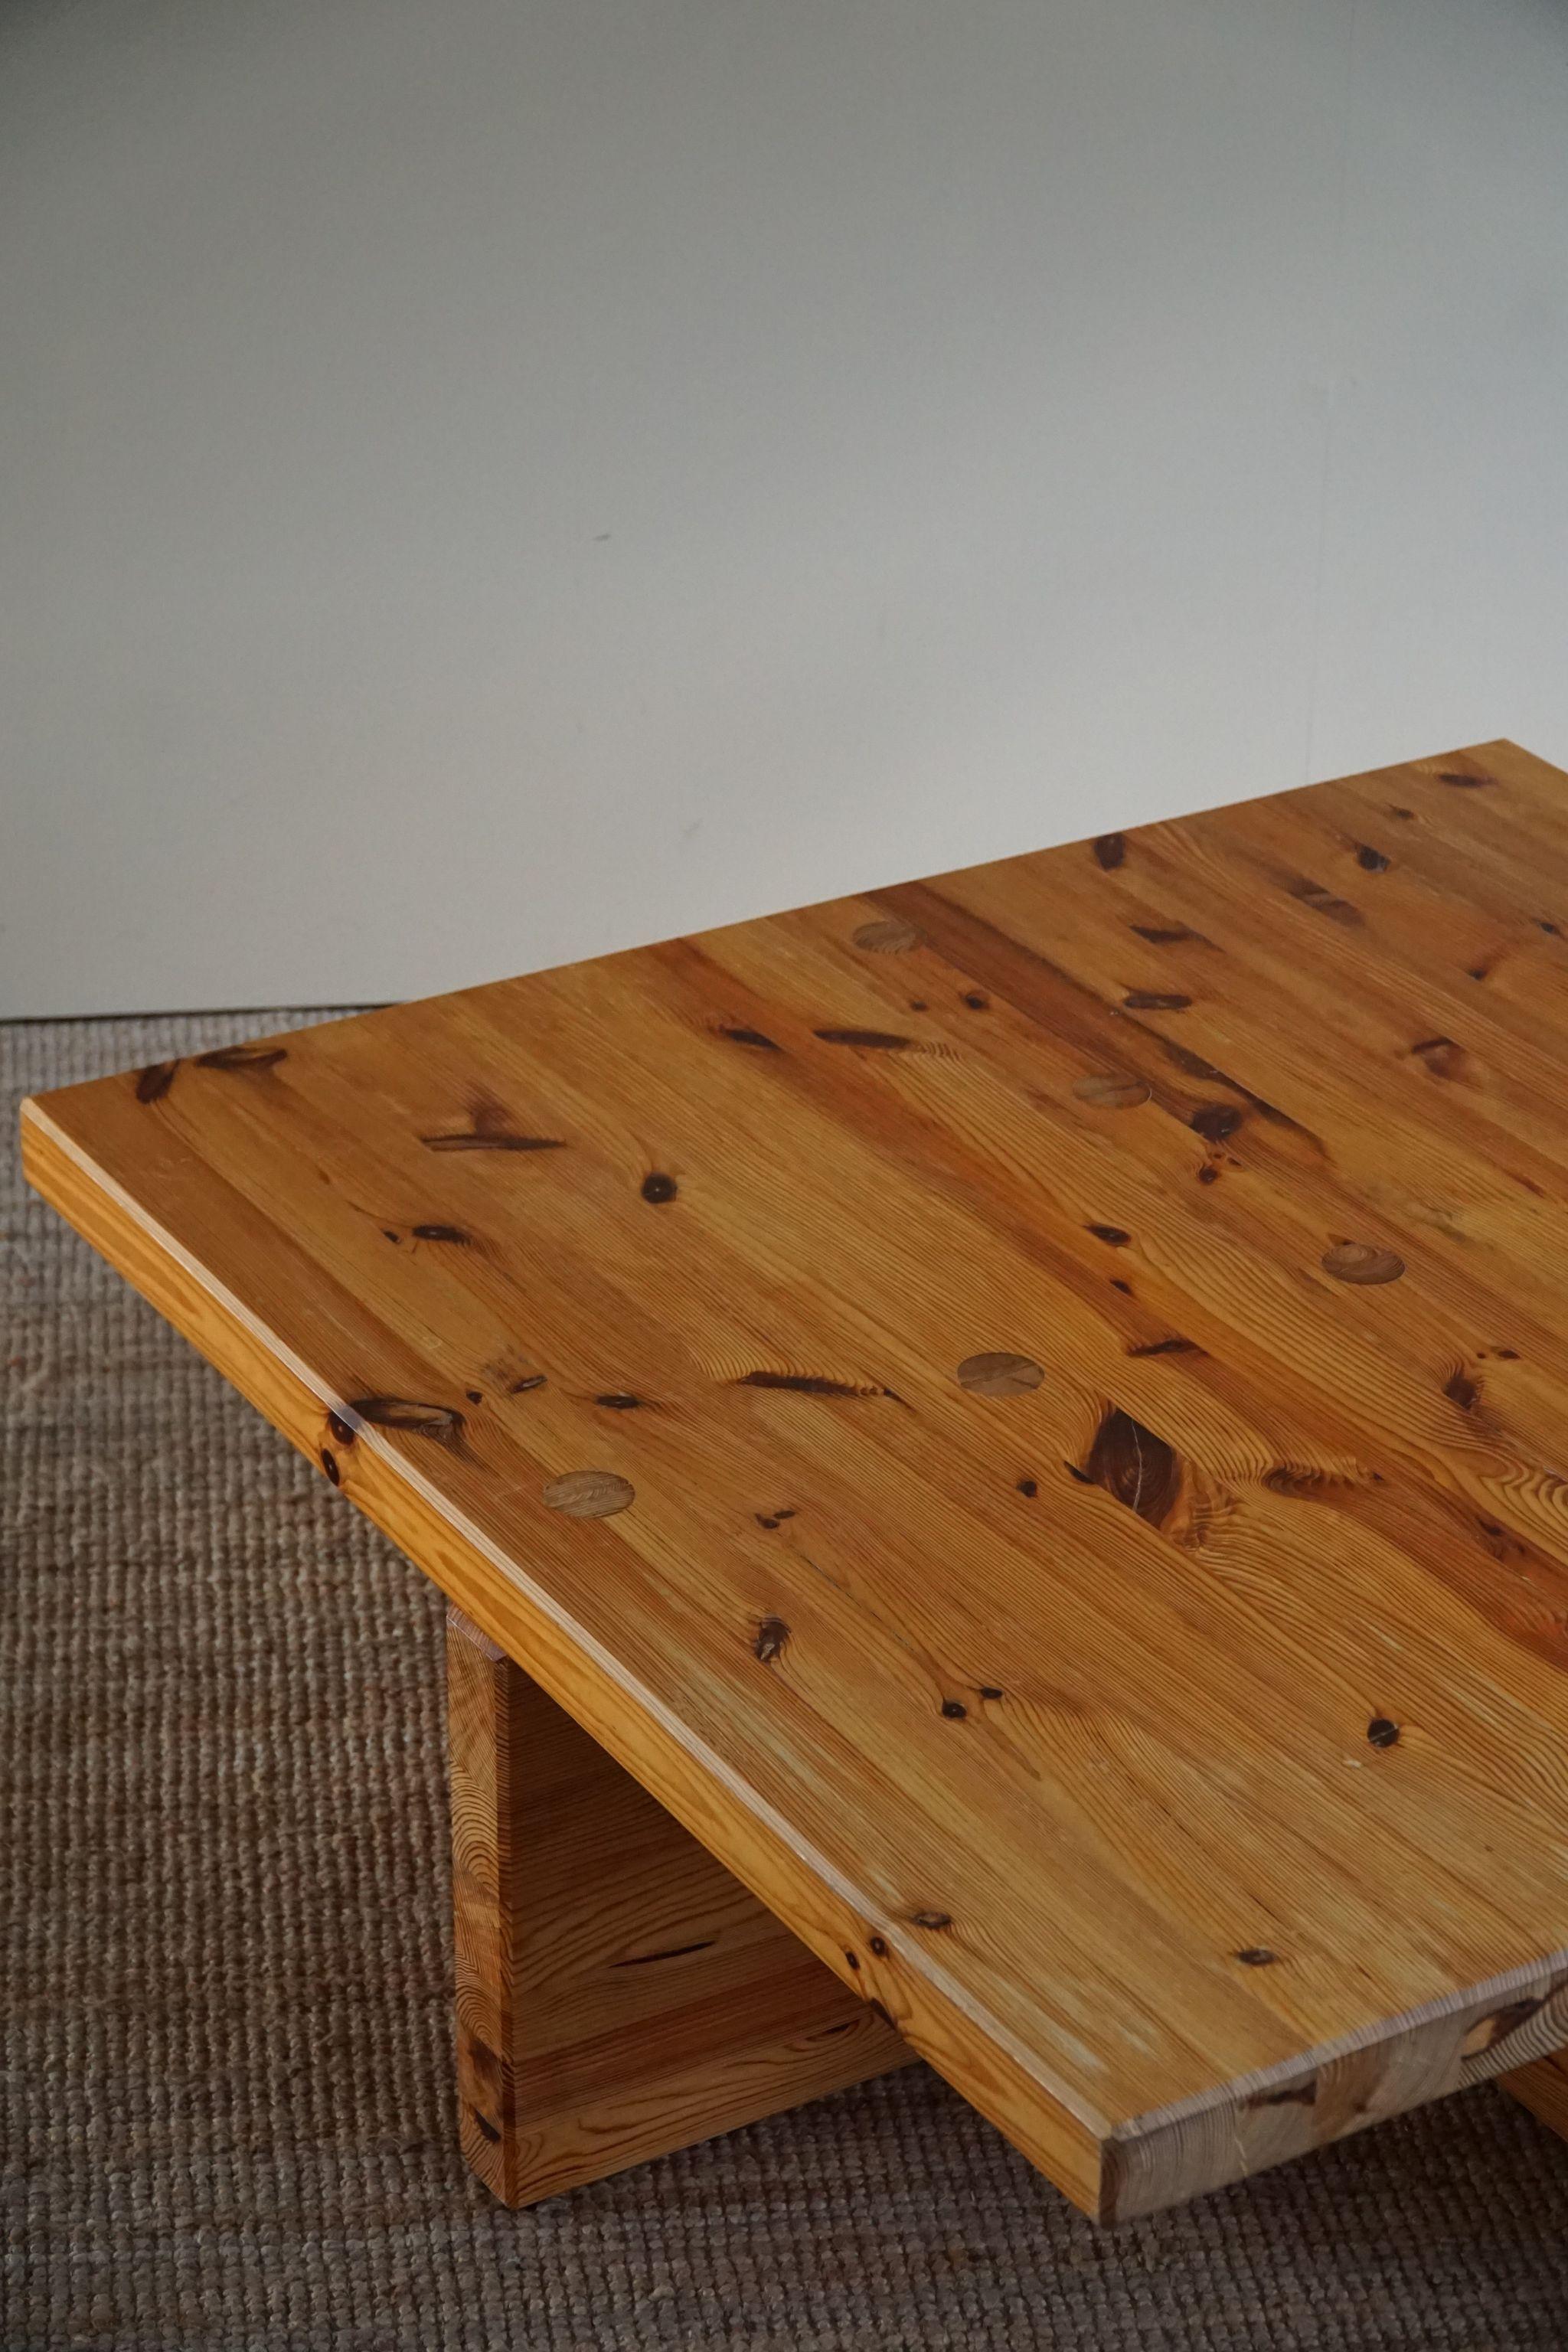 Late 20th Century Swedish Modern Solid Pine Coffee Table by Sven Larsson, Brutalist, 1970s